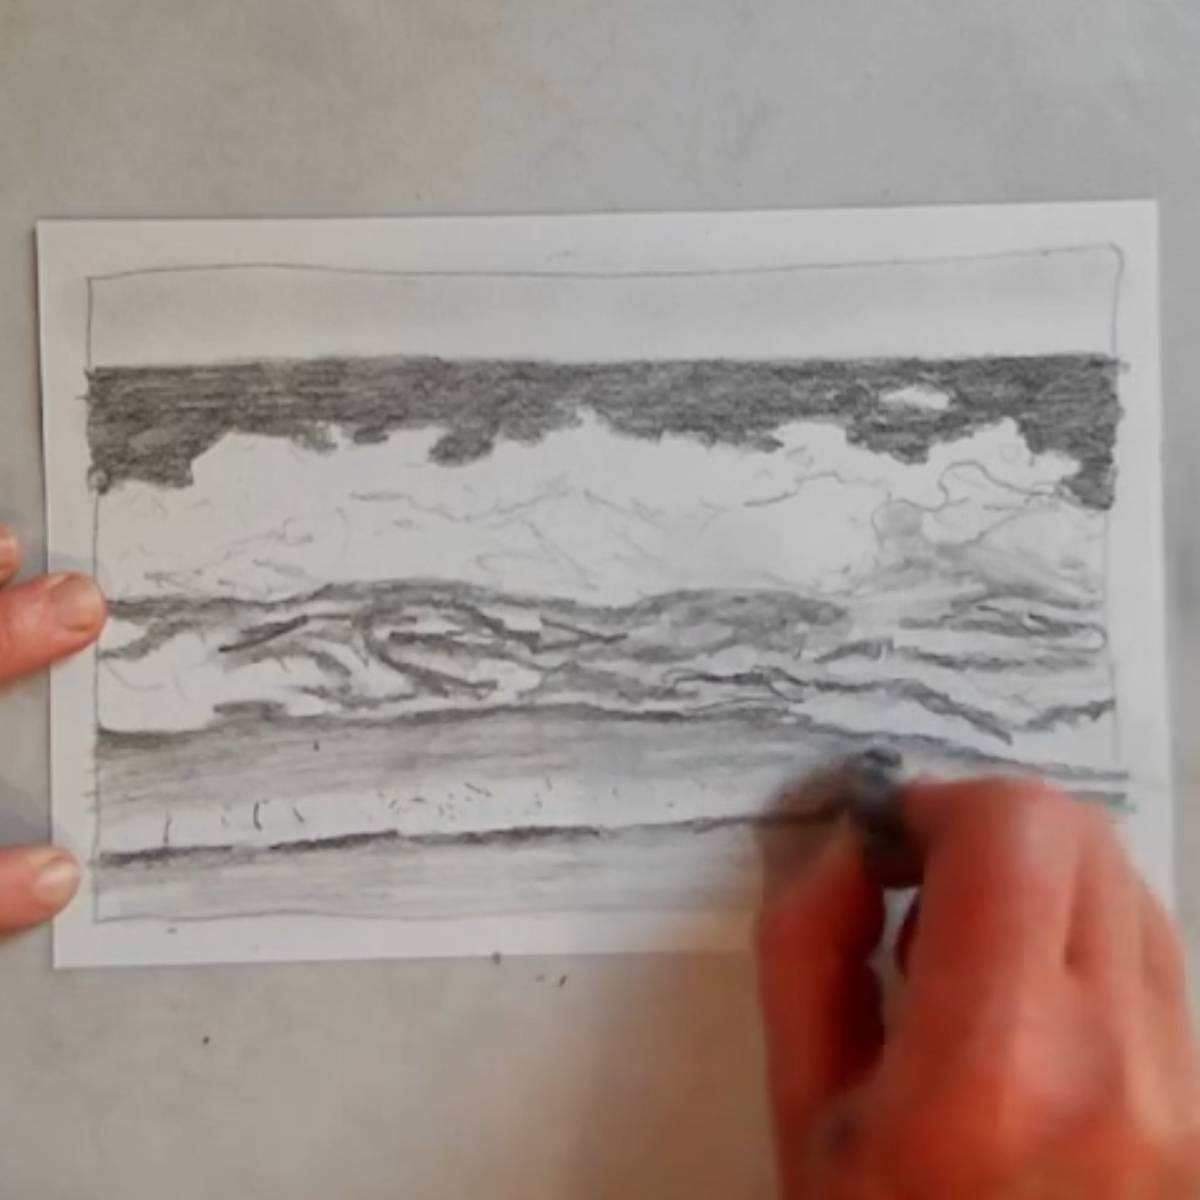 A hand erasing highlights in an ocean scape drawing.